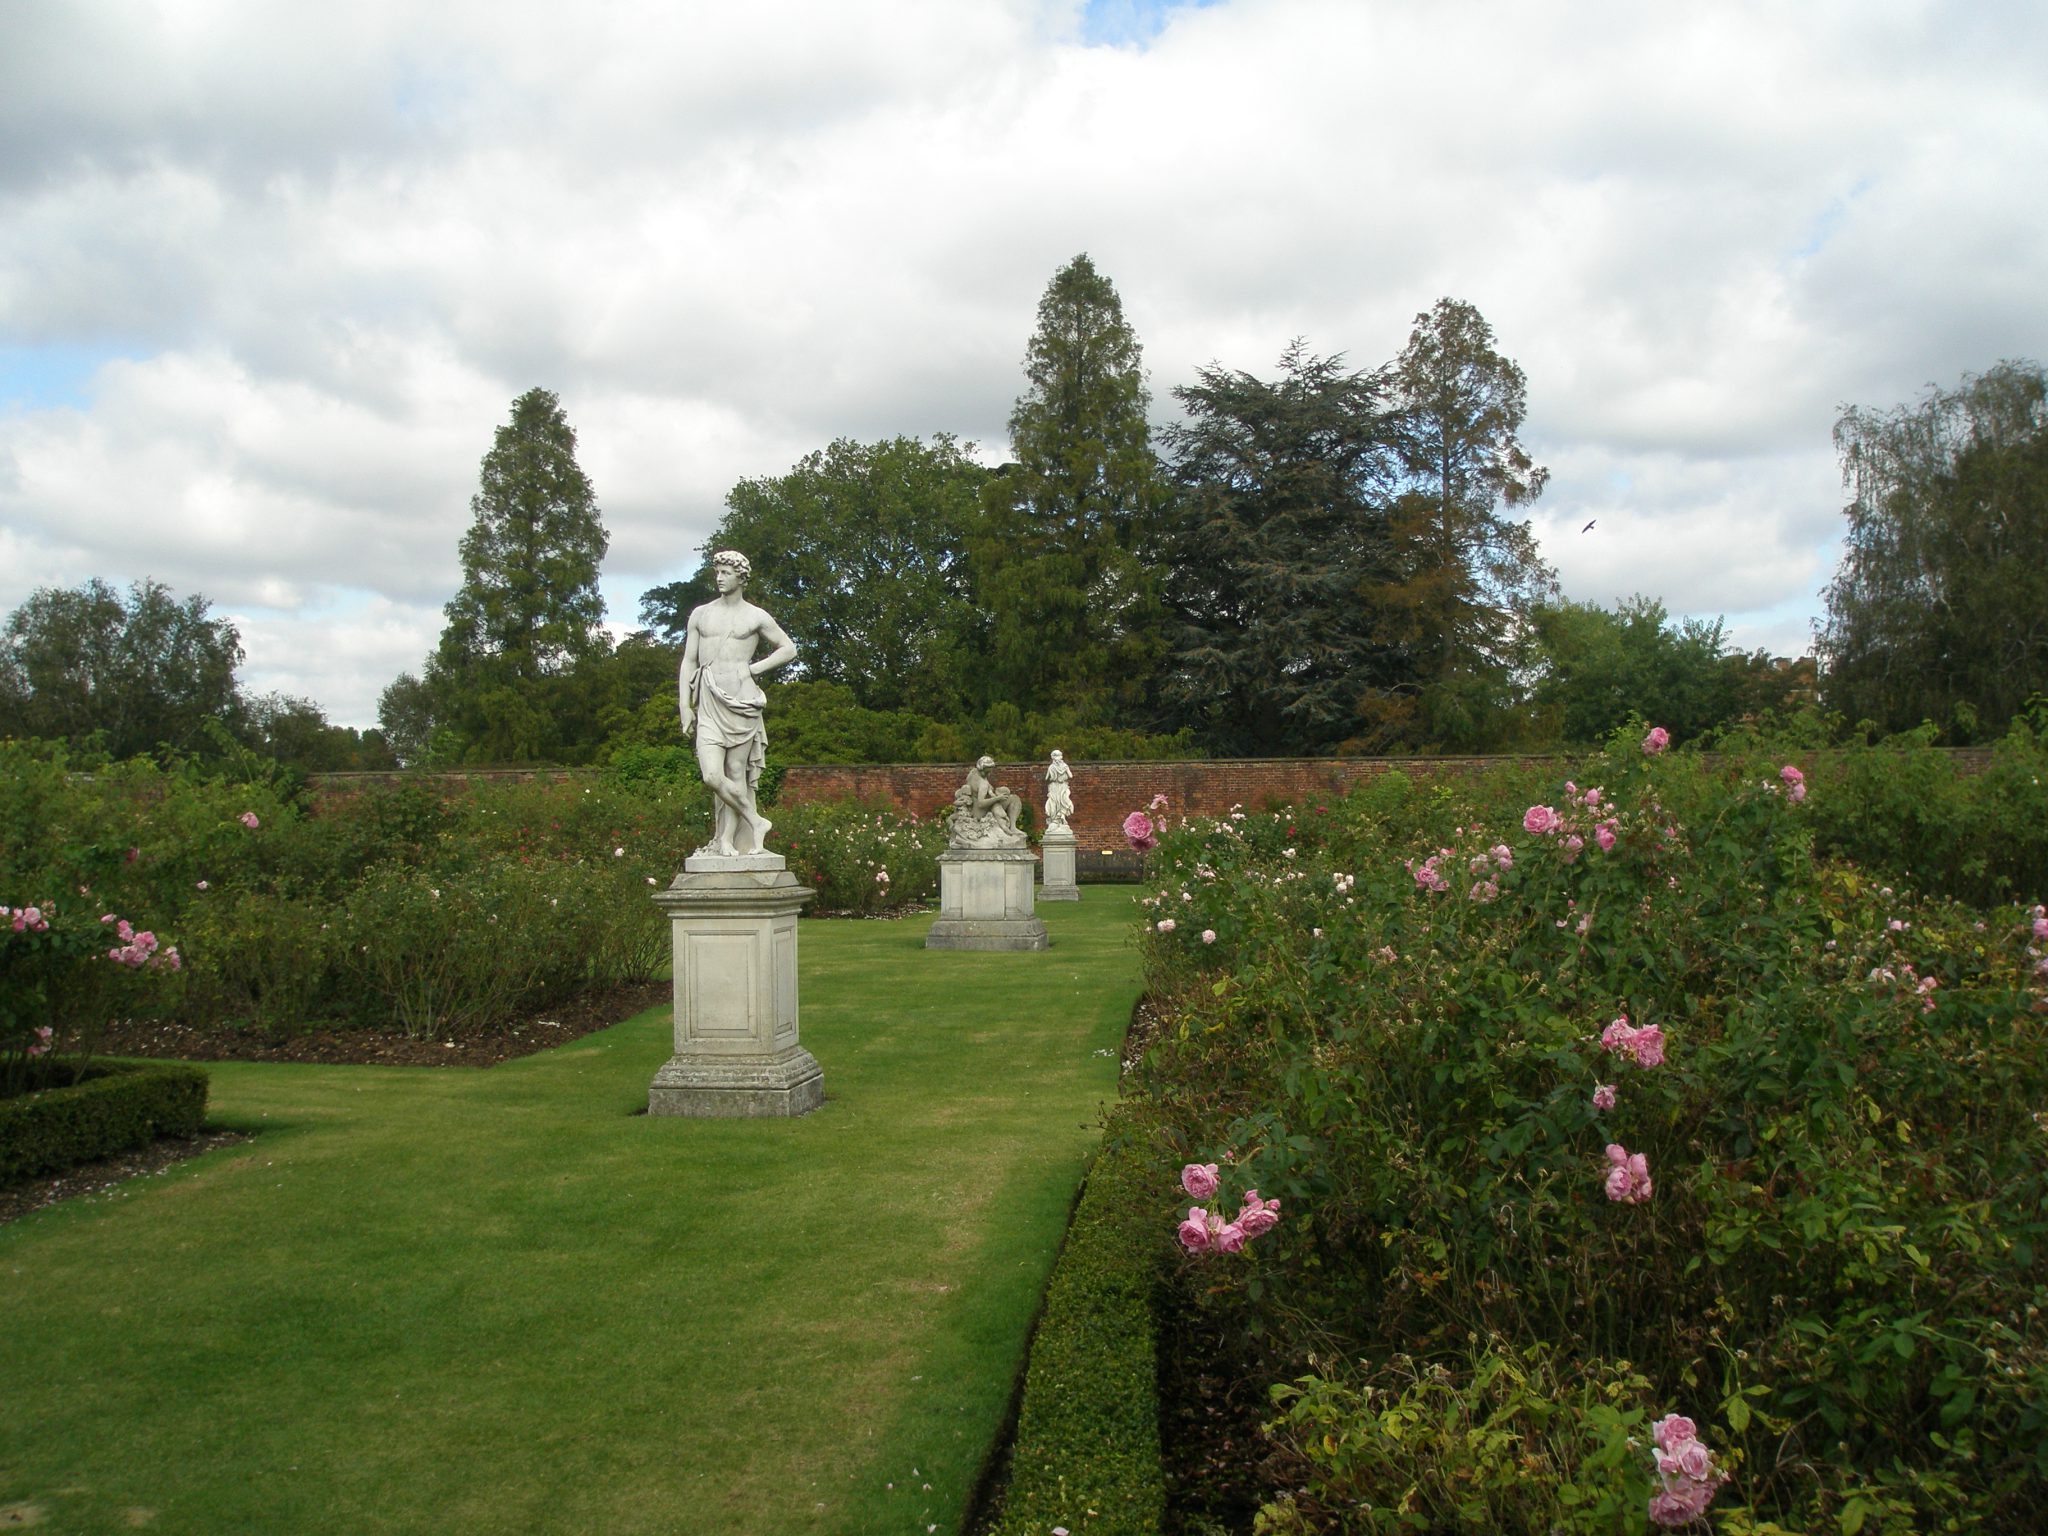 The Rose Garden, with statues of Flora and Adonis